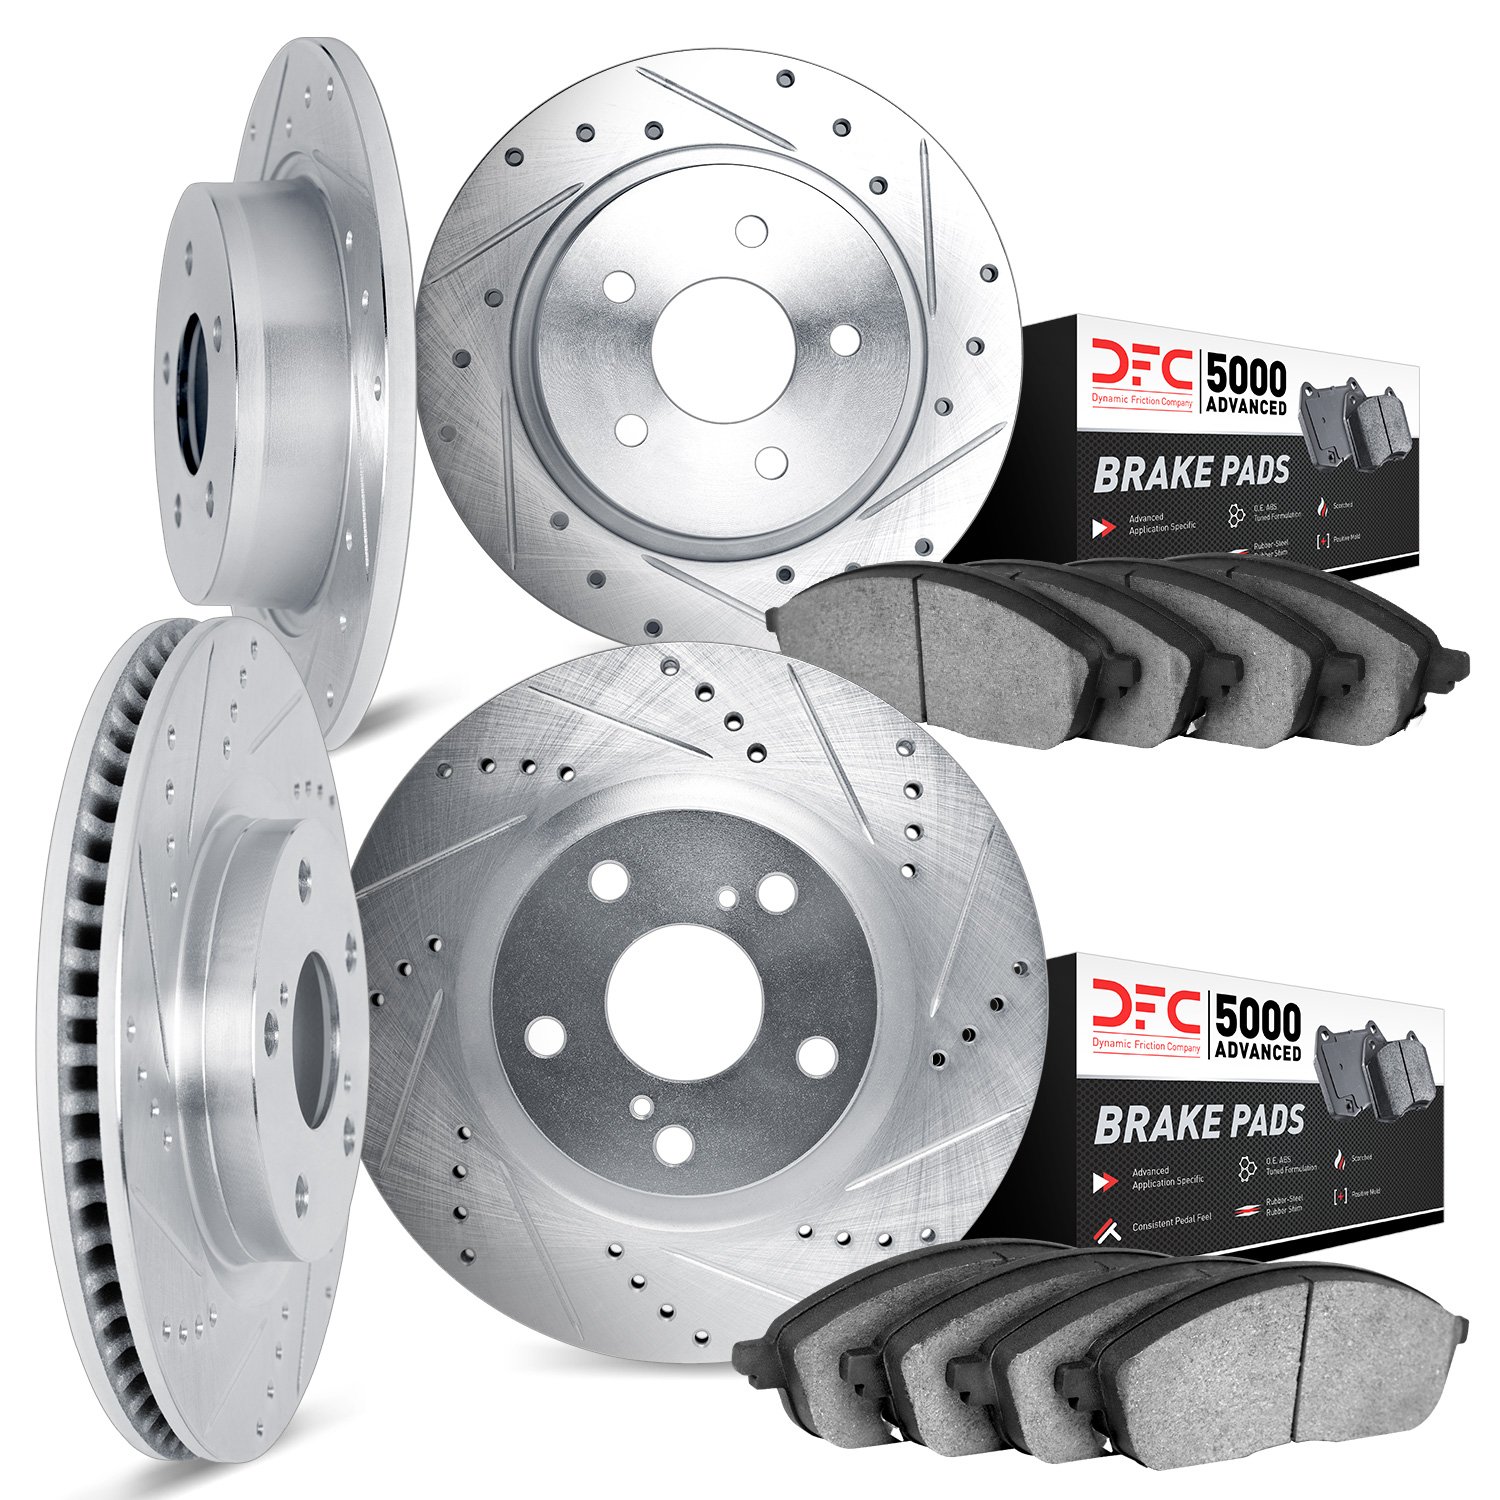 7504-54319 Drilled/Slotted Brake Rotors w/5000 Advanced Brake Pads Kit [Silver], 2001-2002 Ford/Lincoln/Mercury/Mazda, Position: